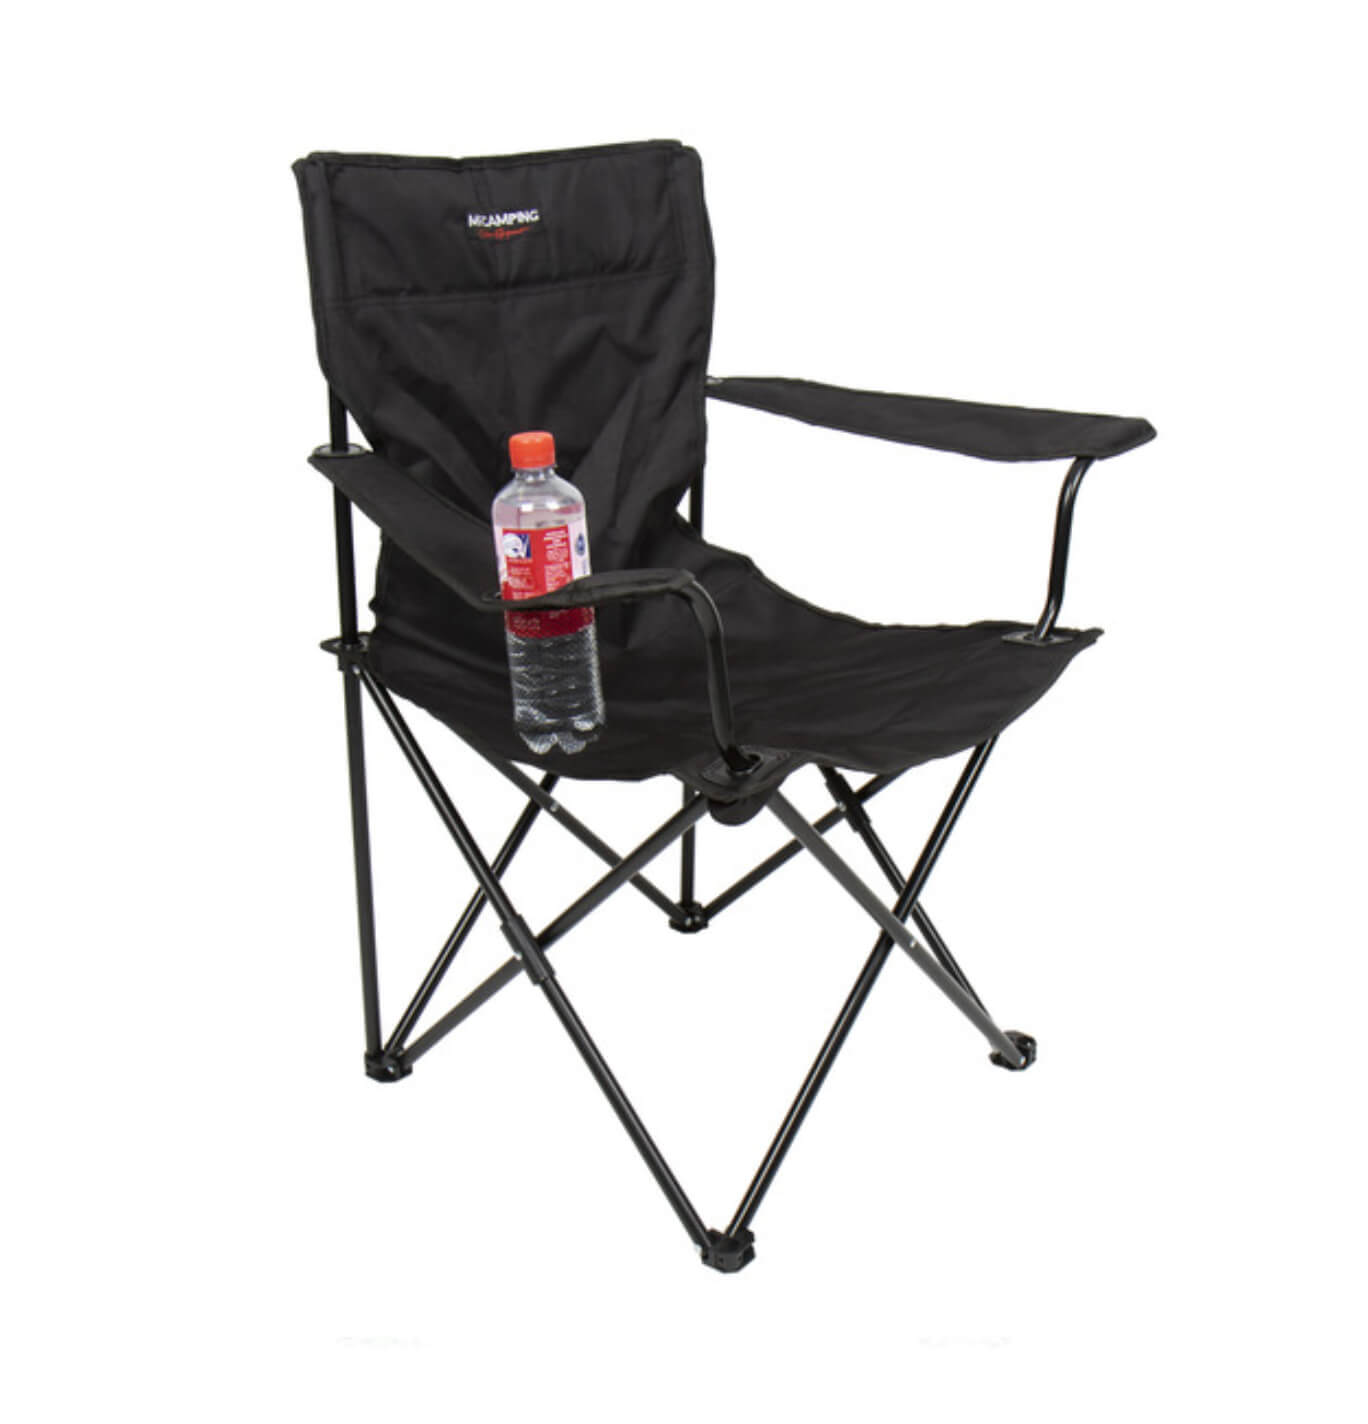 Reimo McCamping Mahalo Folding Outdoor Camping Chair Image